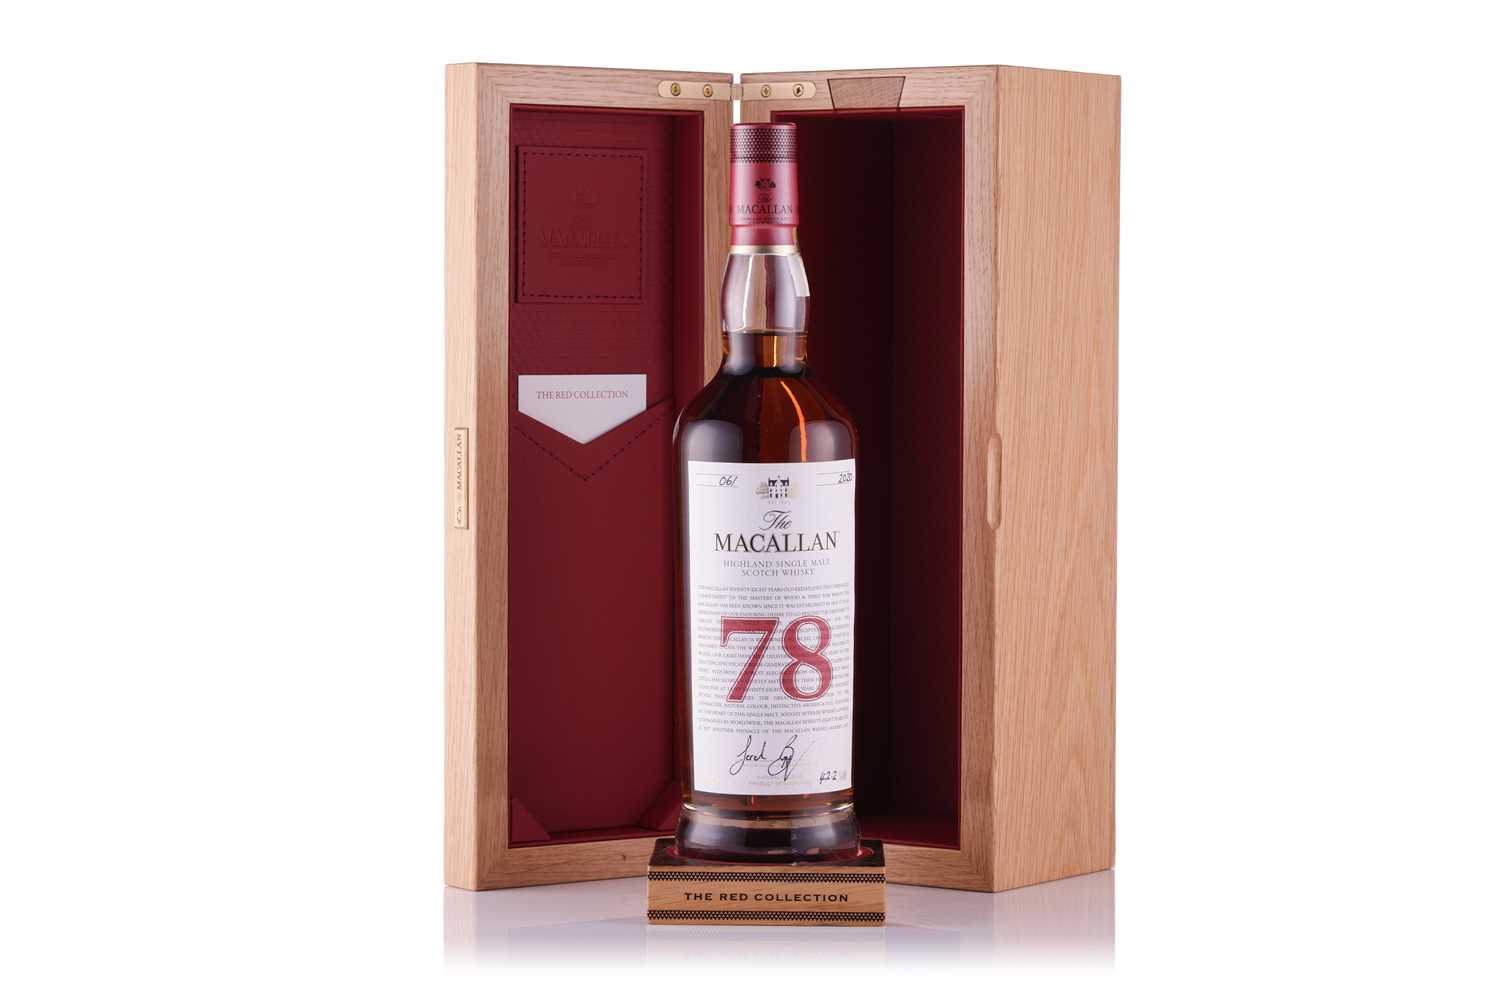 The Macallan 78 year old, The Red Collection. Distilled and bottled by The Macallan Distillery Ltd - Image 2 of 13